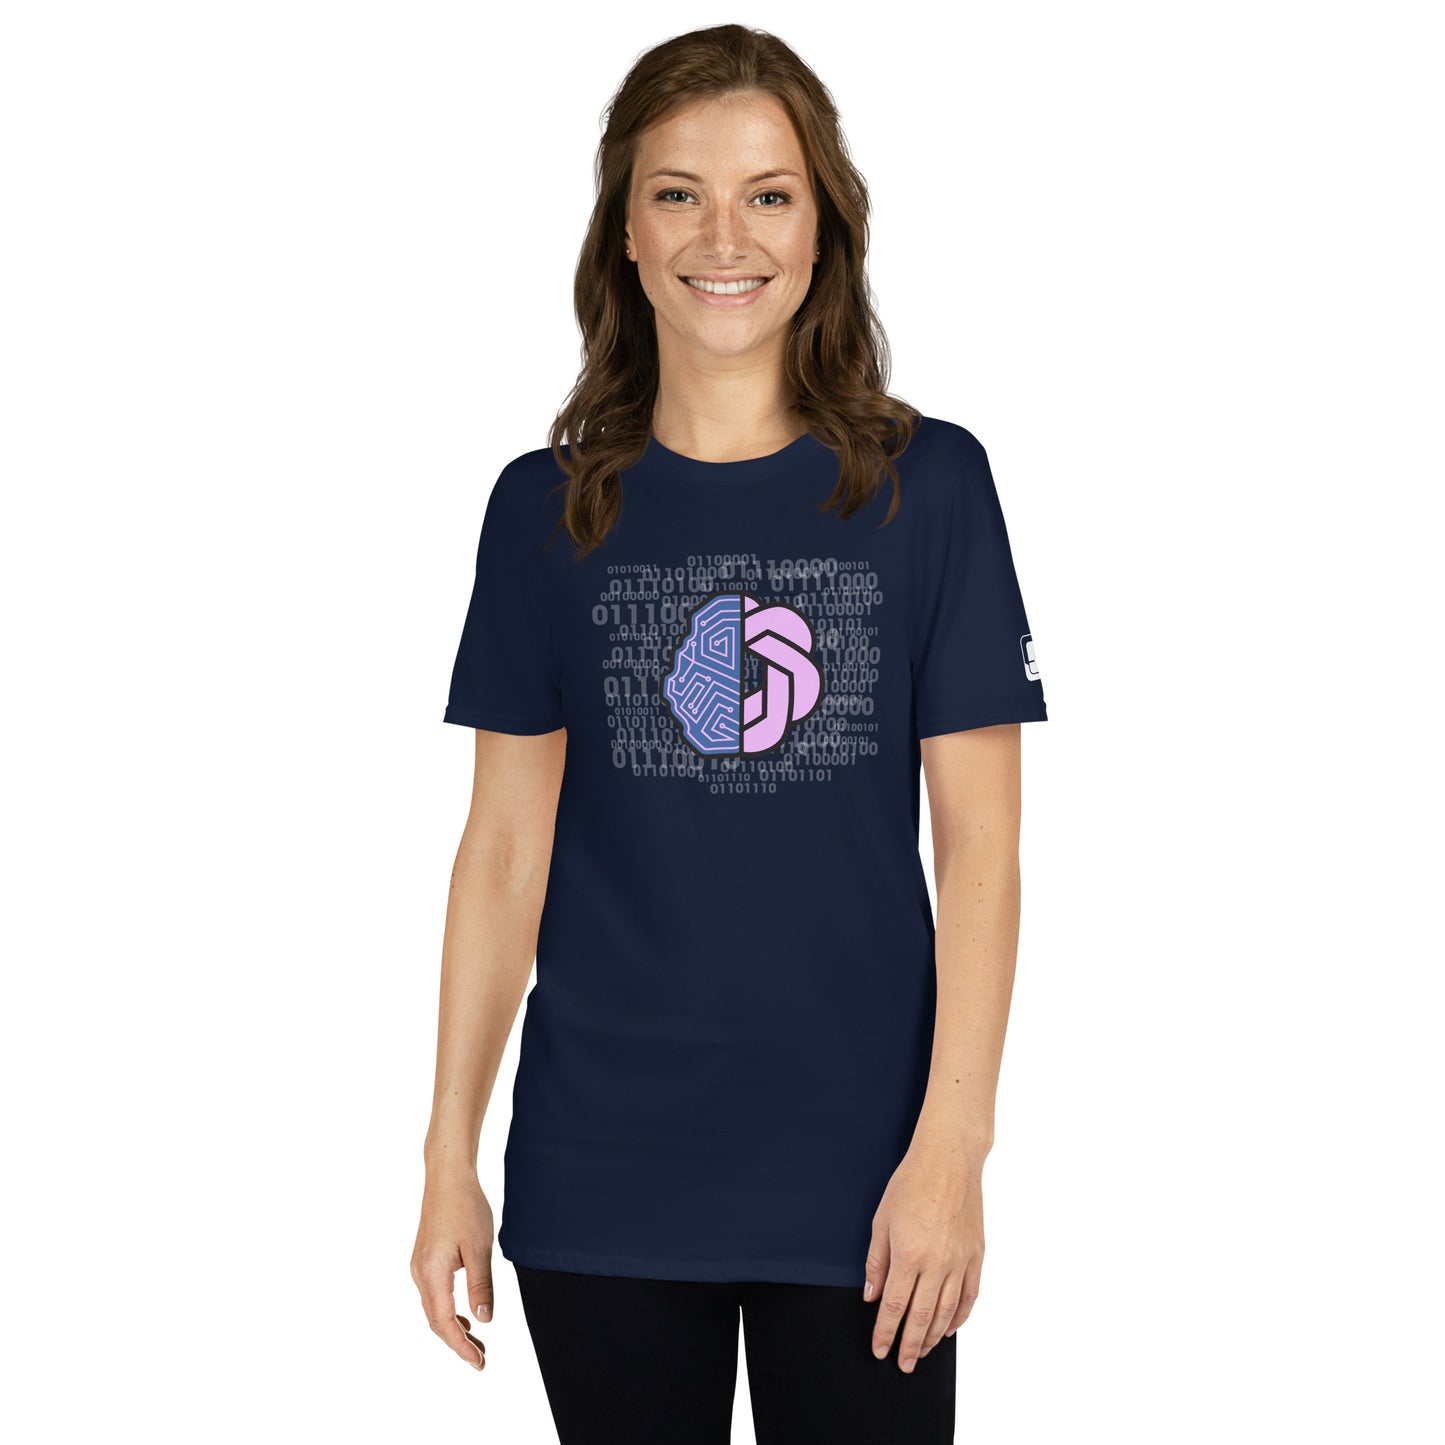 Smiling woman wearing a navy blue t-shirt with a bright pink and purple abstract geometric design surrounded by binary code, a small logo patch on the sleeve, standing against a light white background.